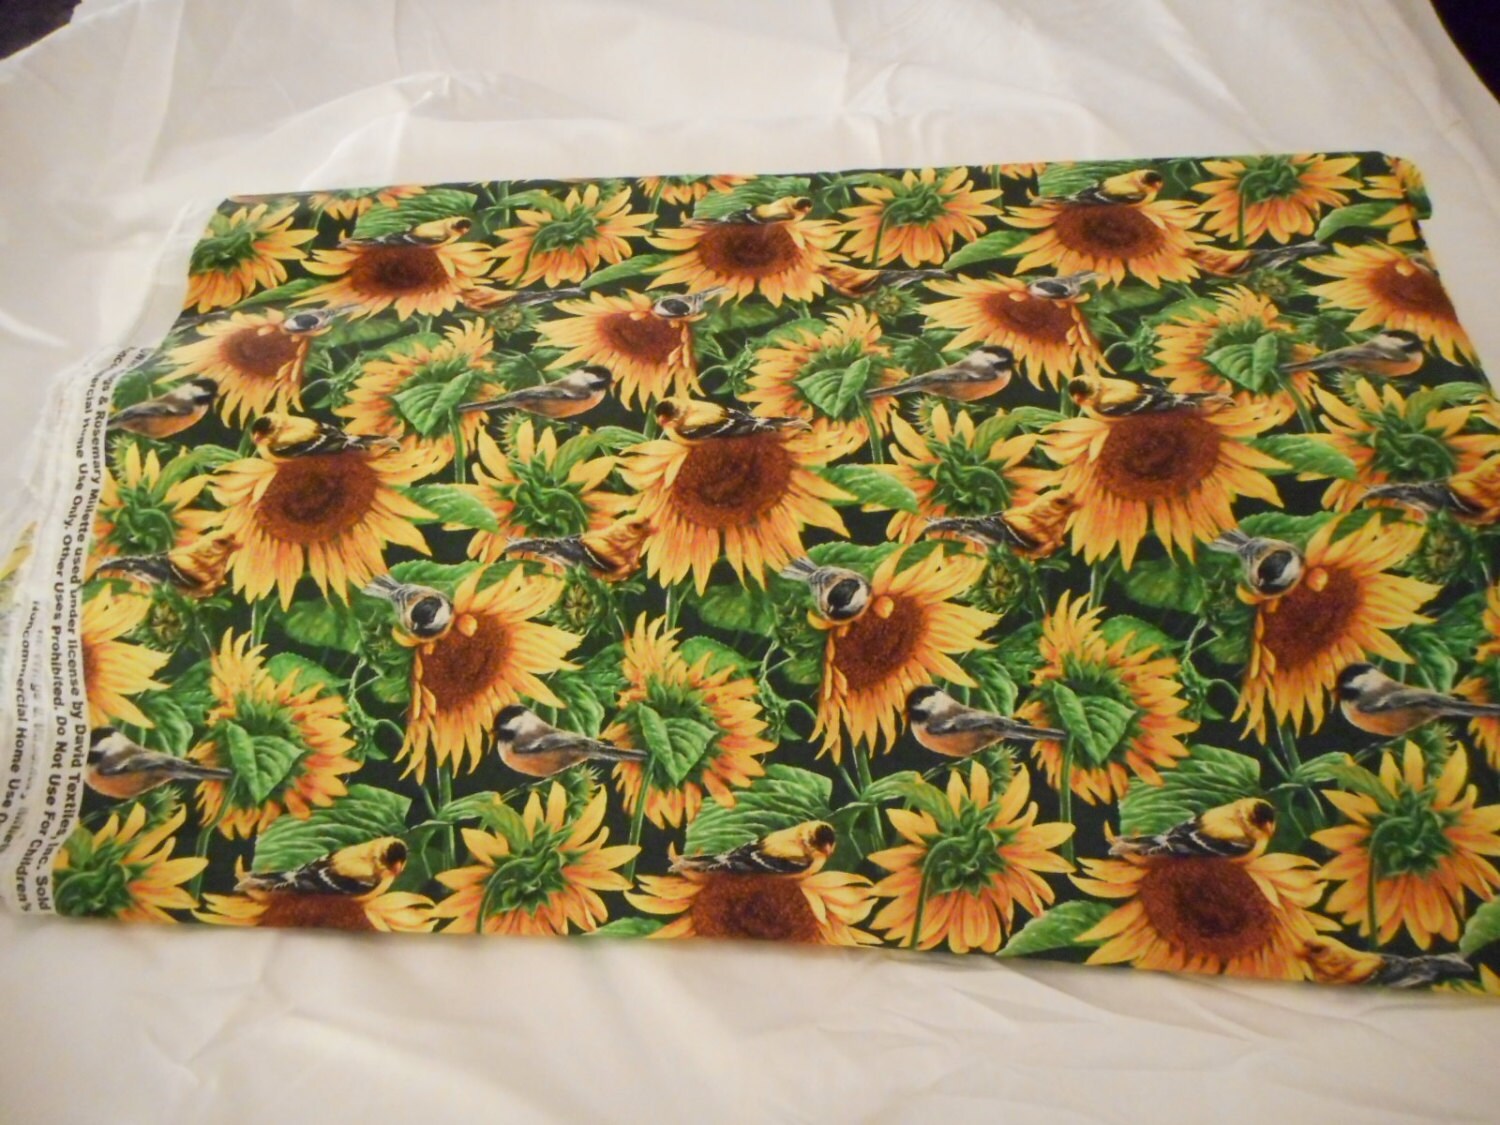 David Textiles Cotton Fabric Sunflowers and Birds 44 Inches